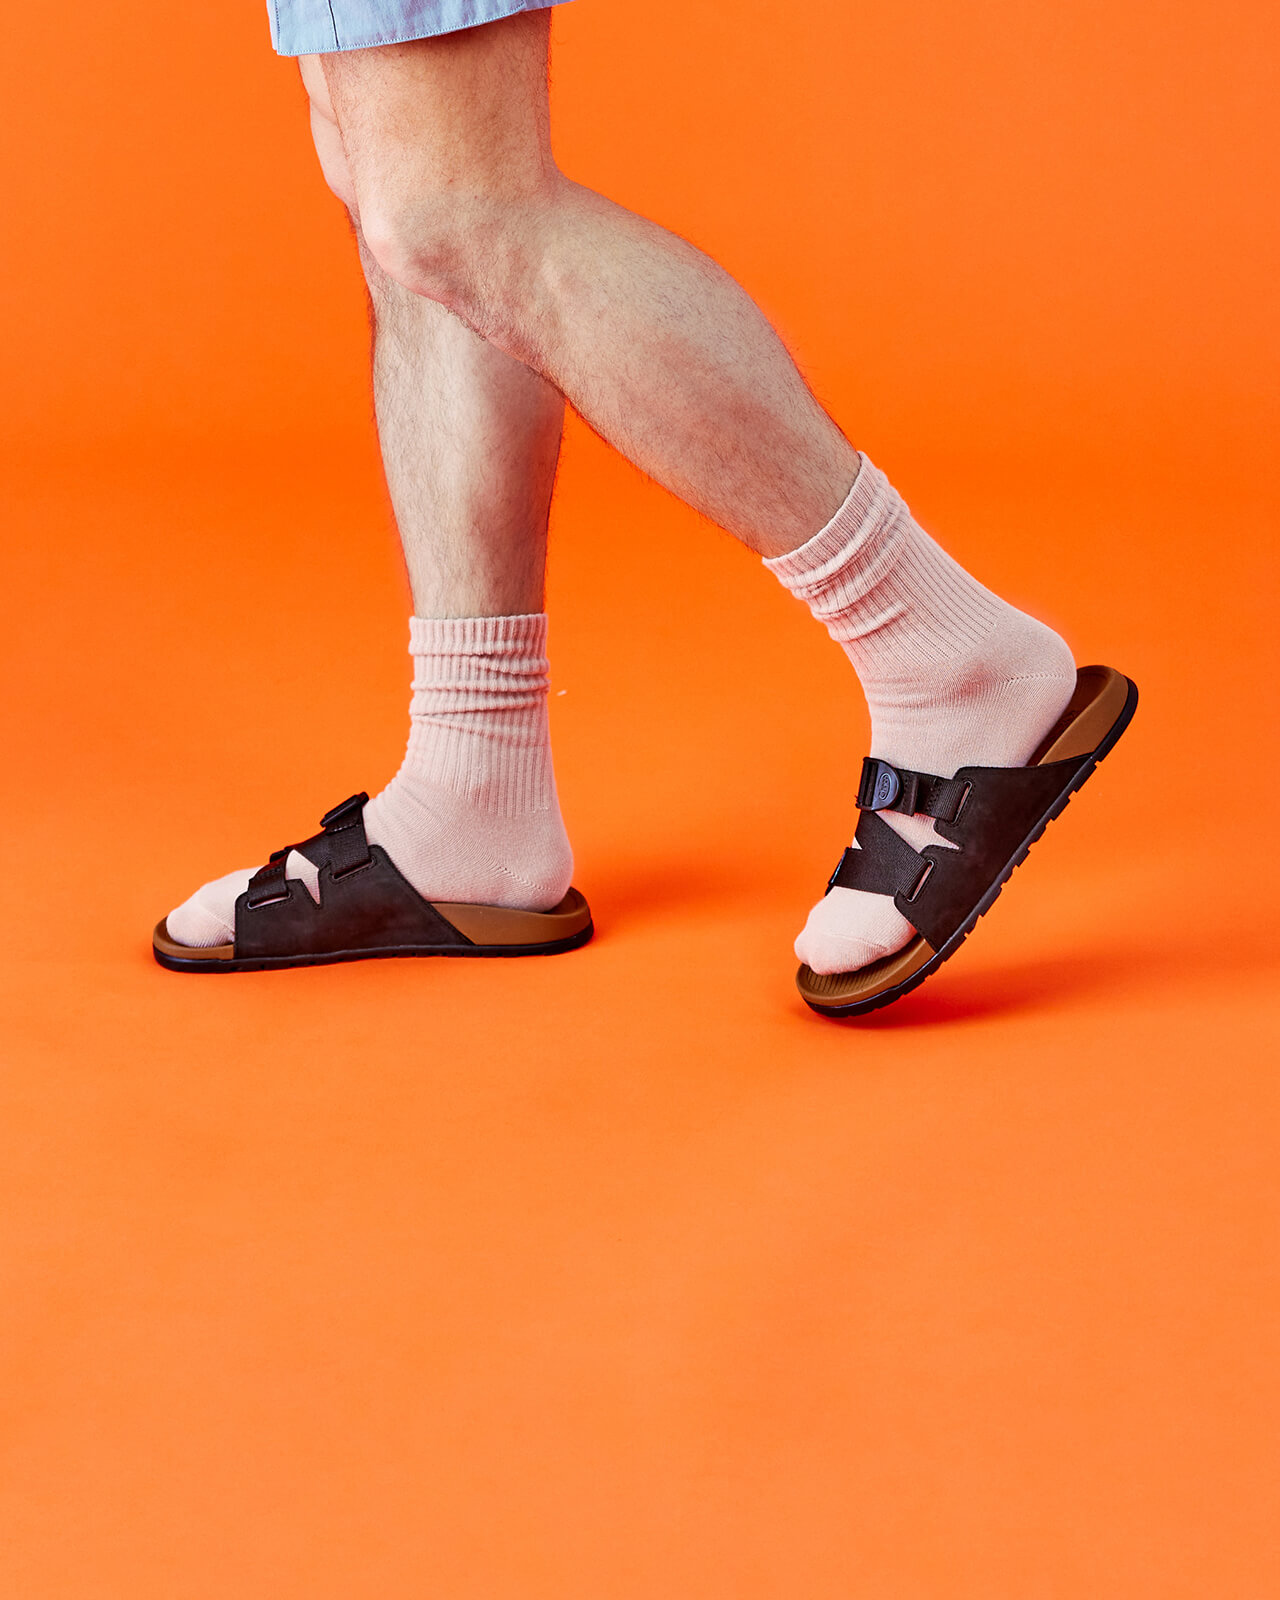 Man wearing socks and leather Chaco sandal